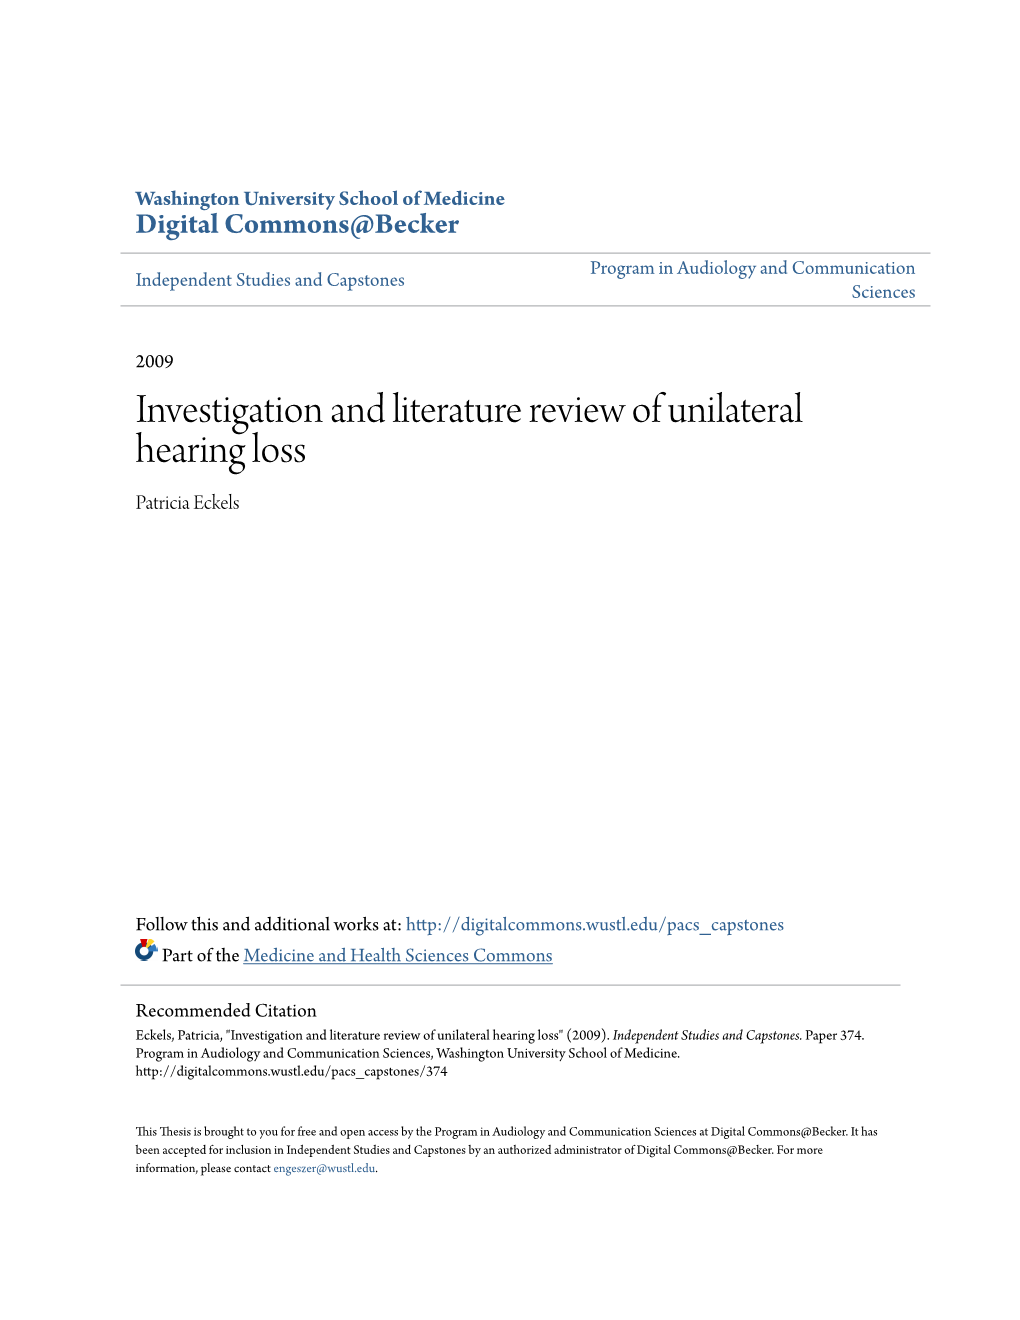 Investigation and Literature Review of Unilateral Hearing Loss Patricia Eckels